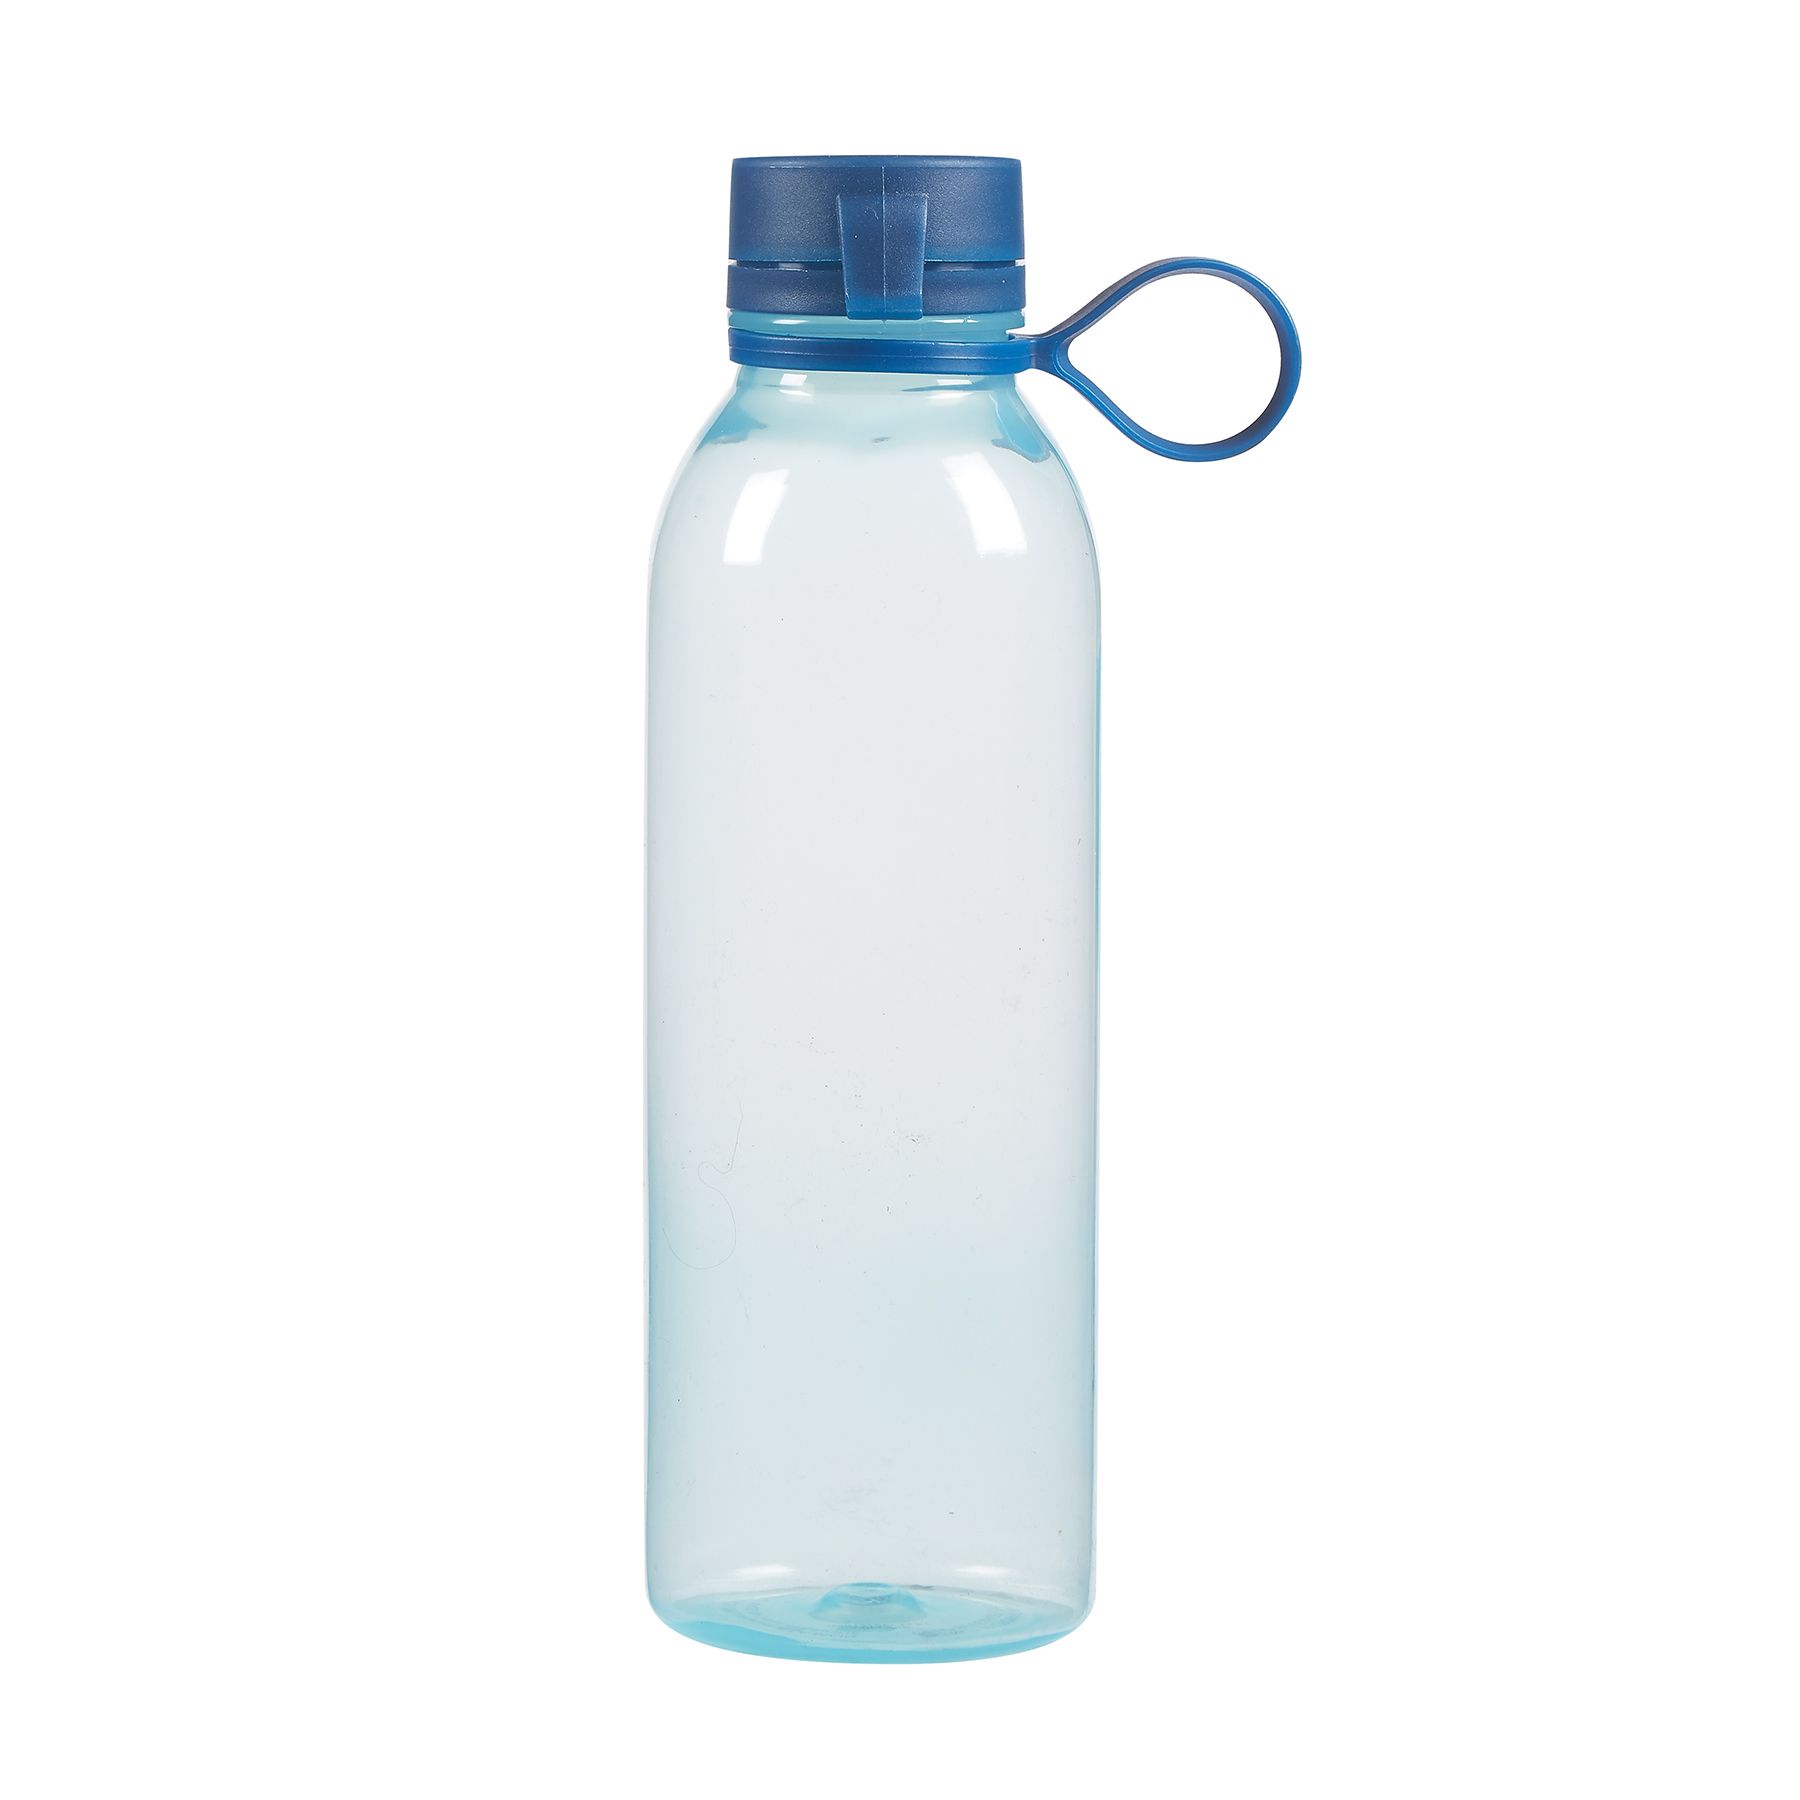 Wholesale Glass Double Wall Water Bottle- 17oz- Teal/Clear CLEAR/DARK TEAL